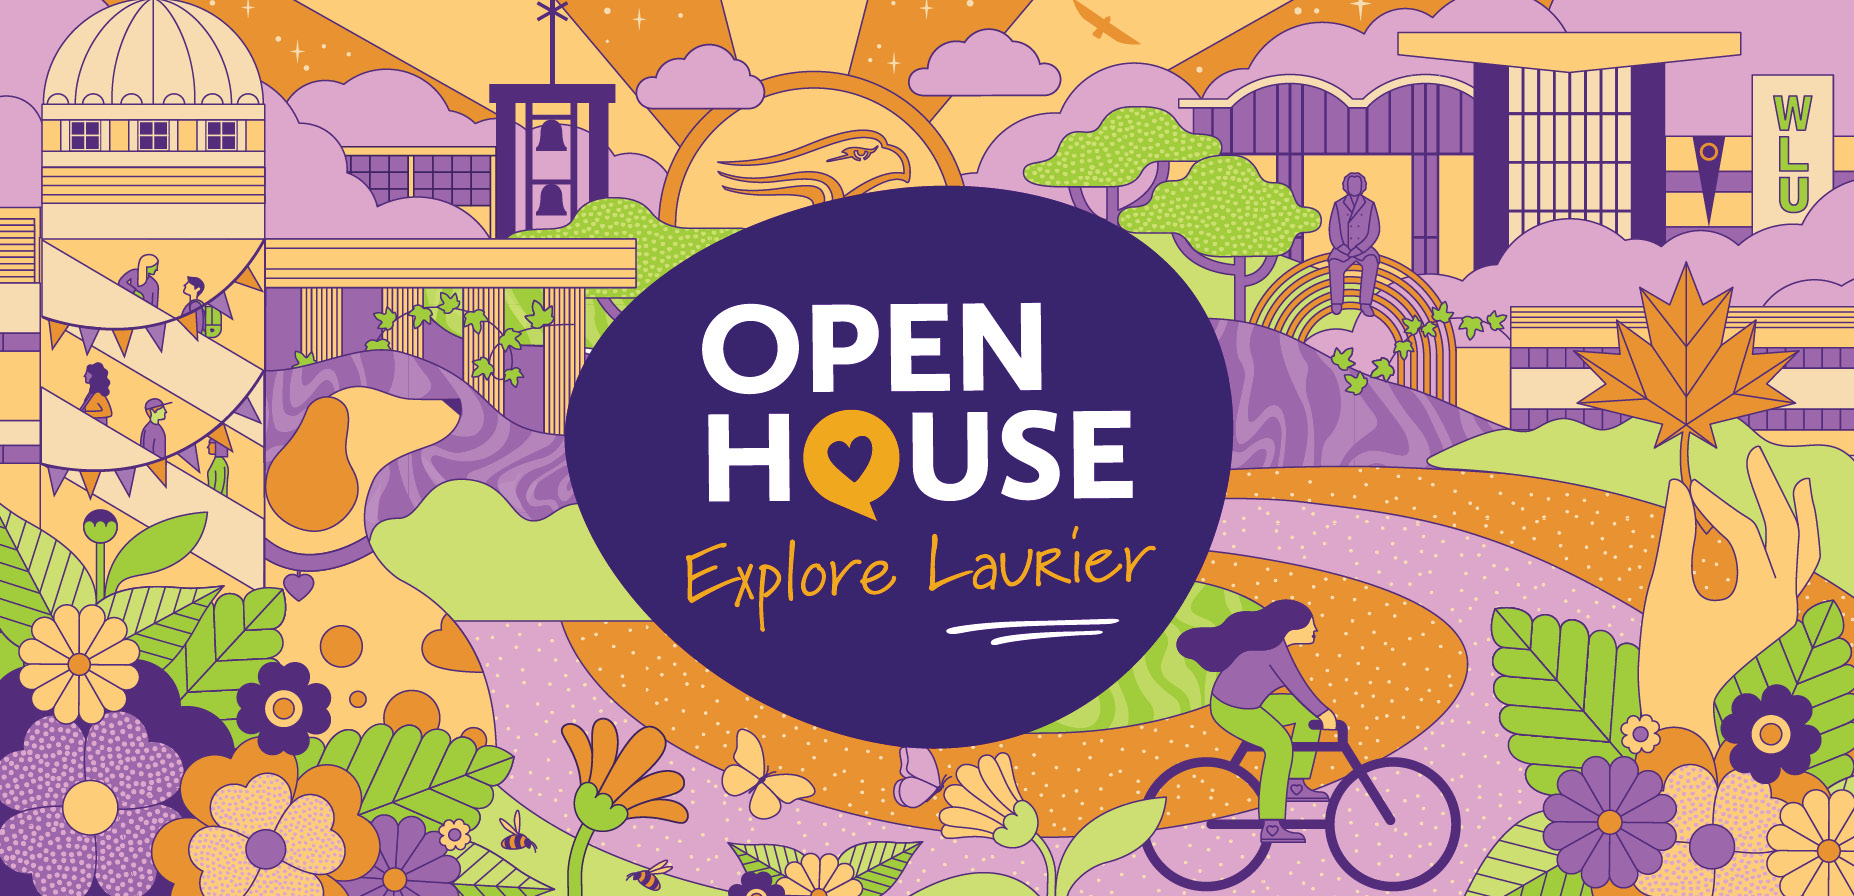 Open House logo and mural